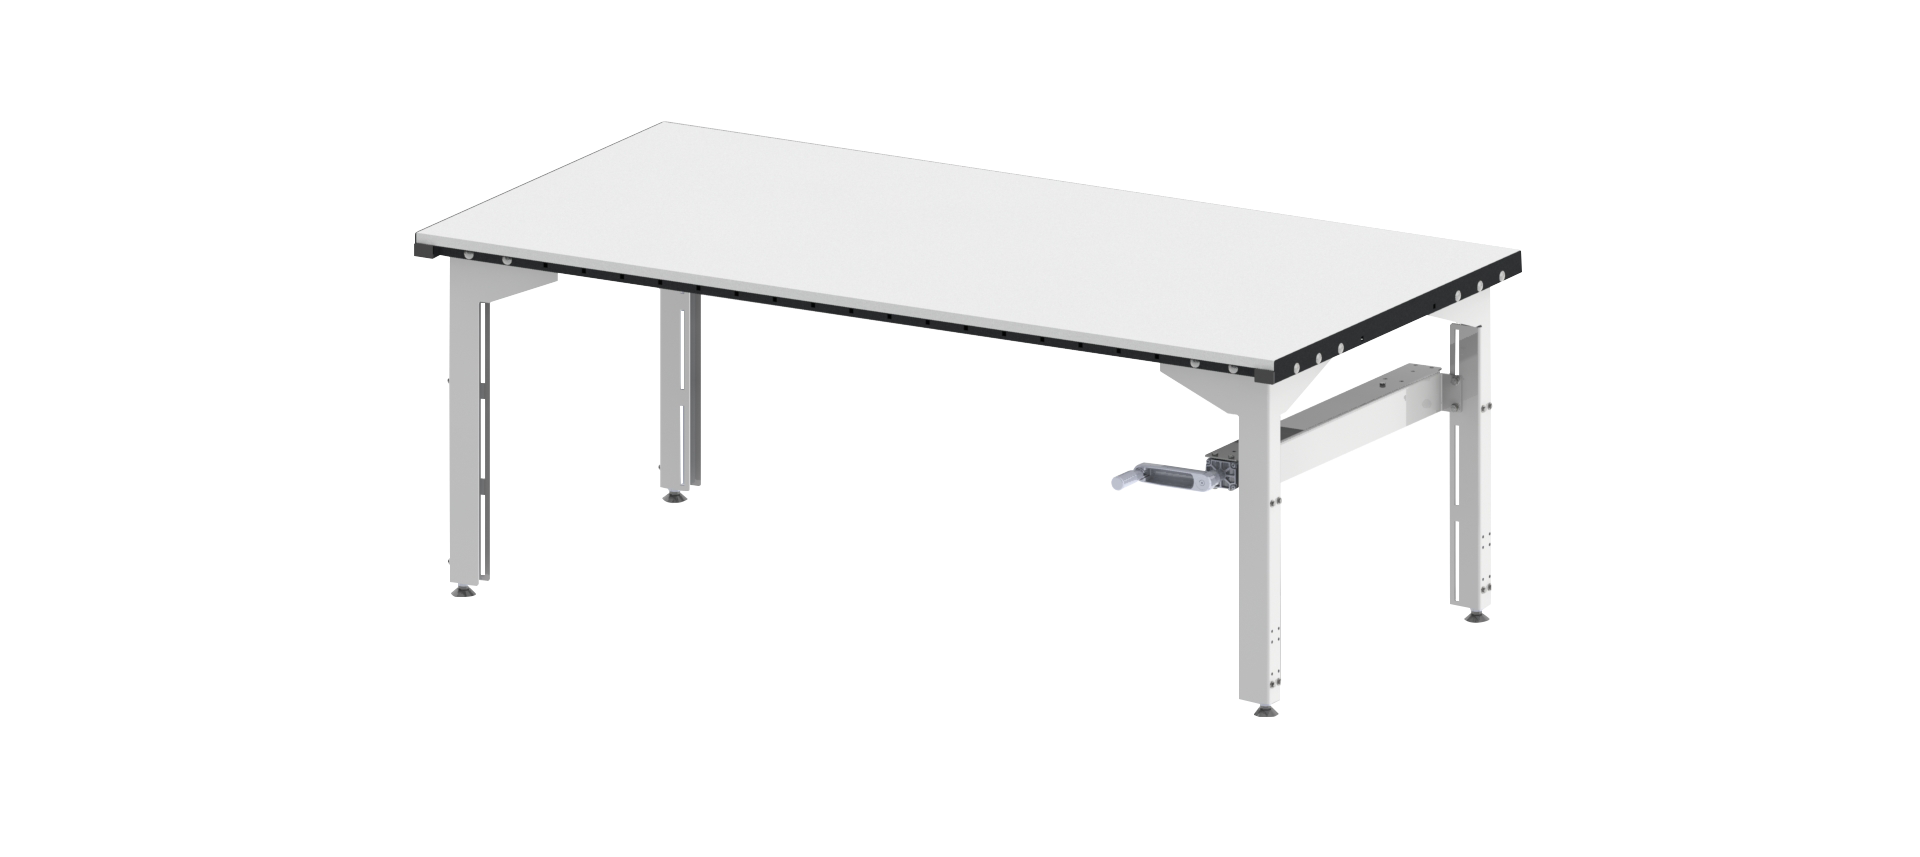 table-emballage-manivelle